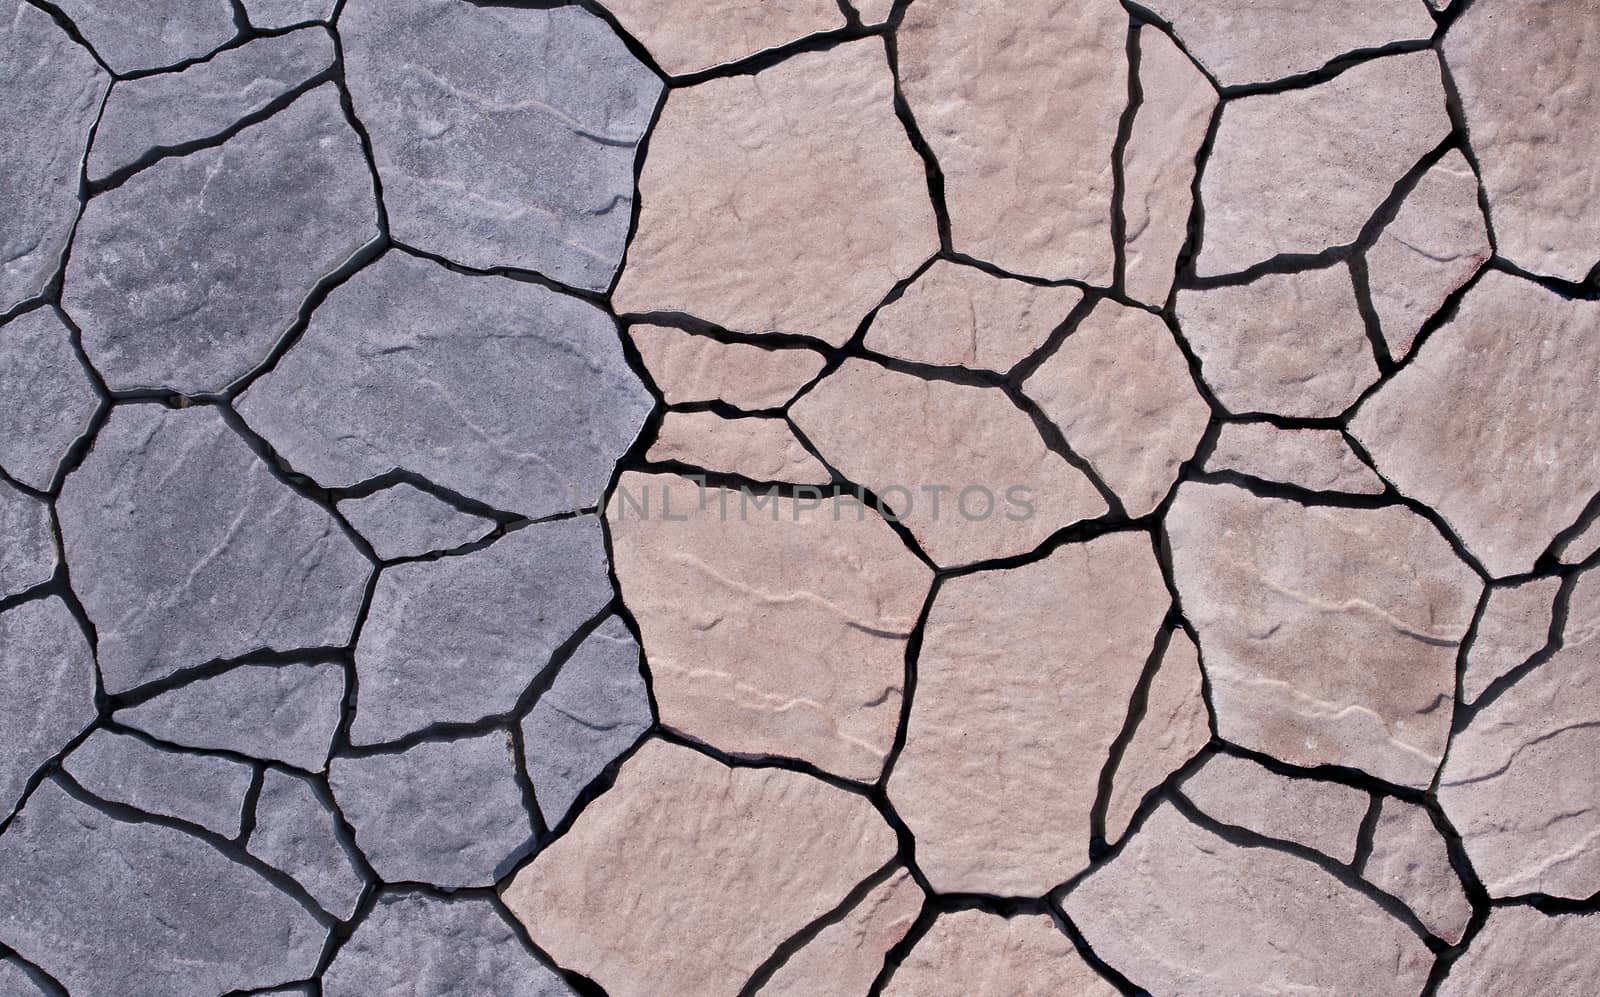 Gray and brown stone pattern background made of concrete